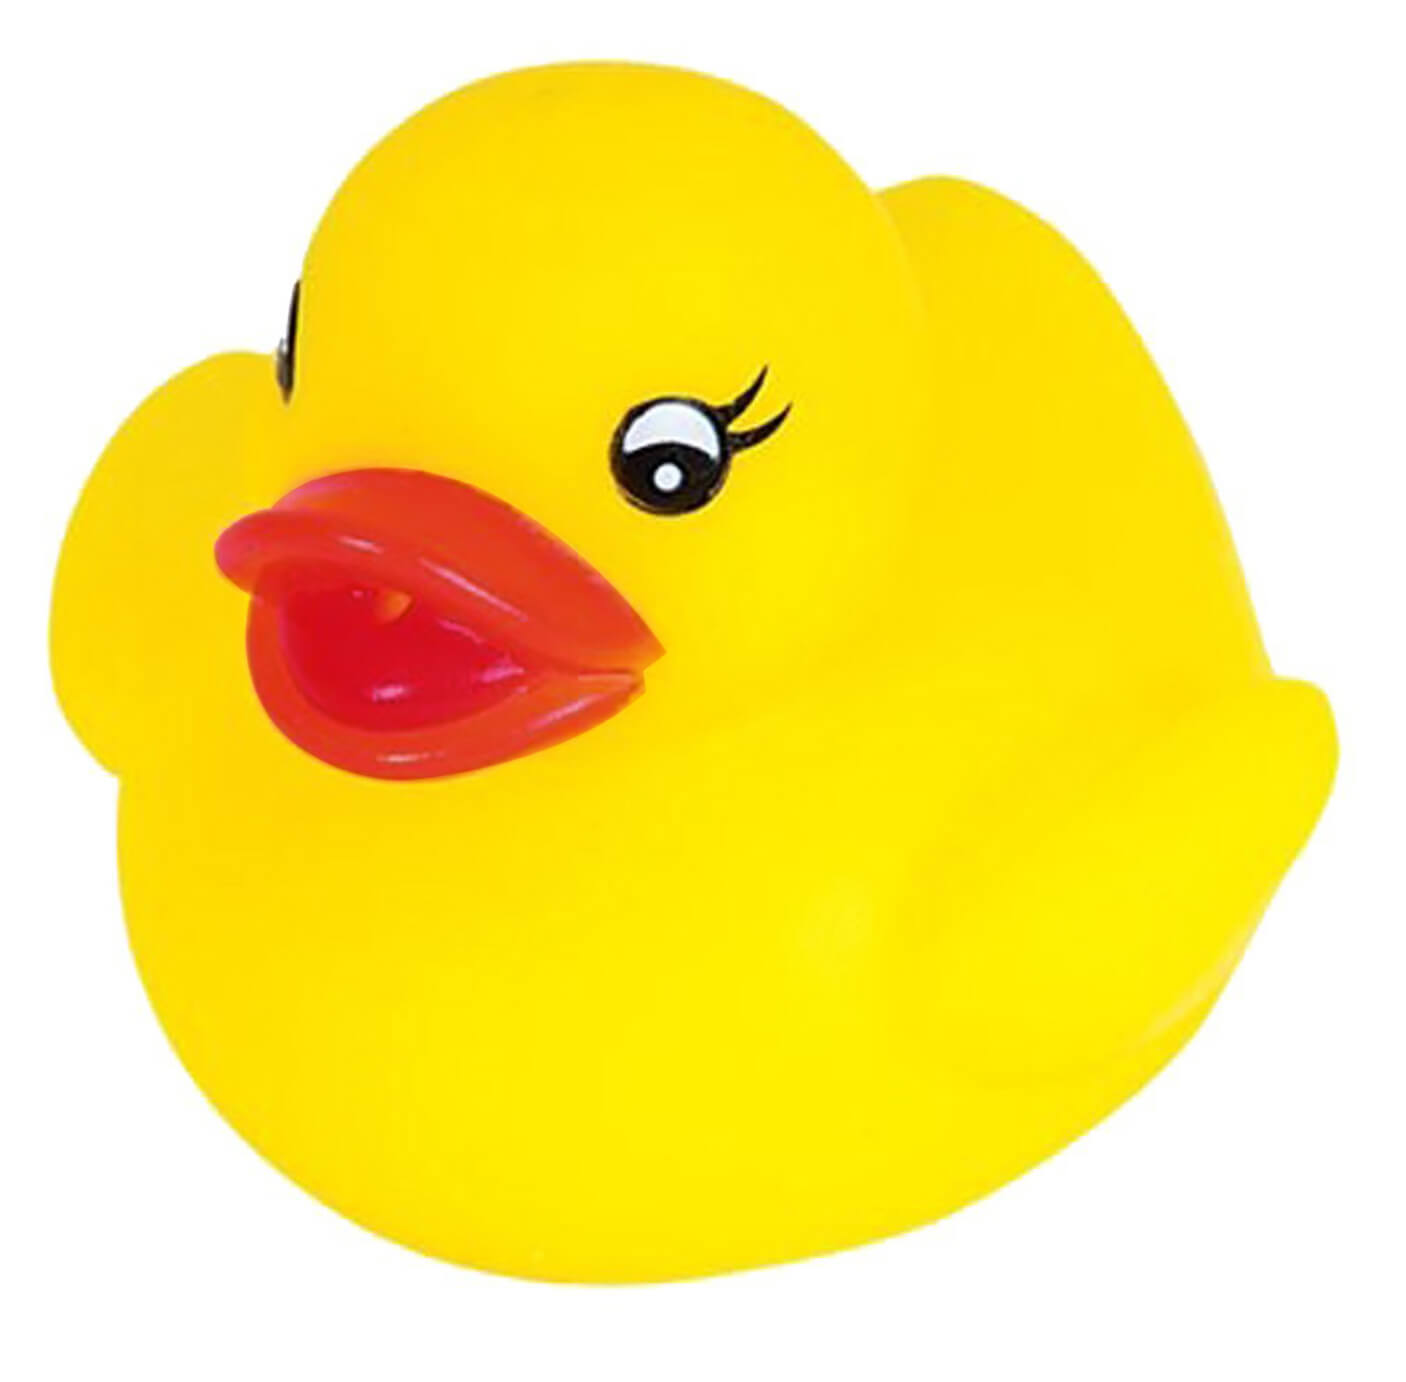 Pack of 6 Six Rubber Duck Family Pack Ducky Baby Bath Toy for Kids Novelty Place Float & Squeak 